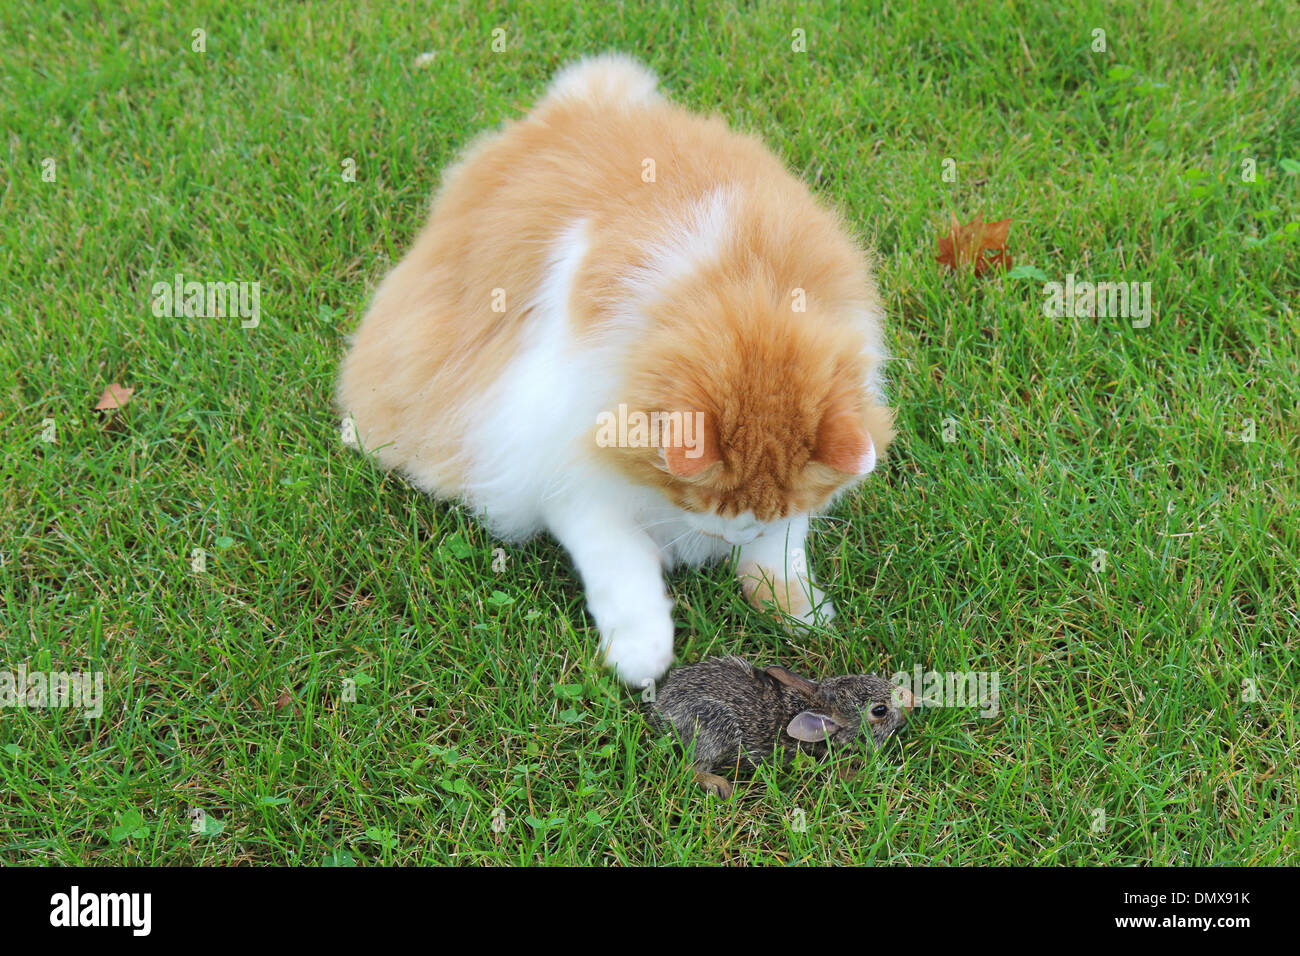 Orange and white domestic longhair cat (Felis catus) with a baby eastern cottontail rabbit (Sylvilagus floridanus) Stock Photo